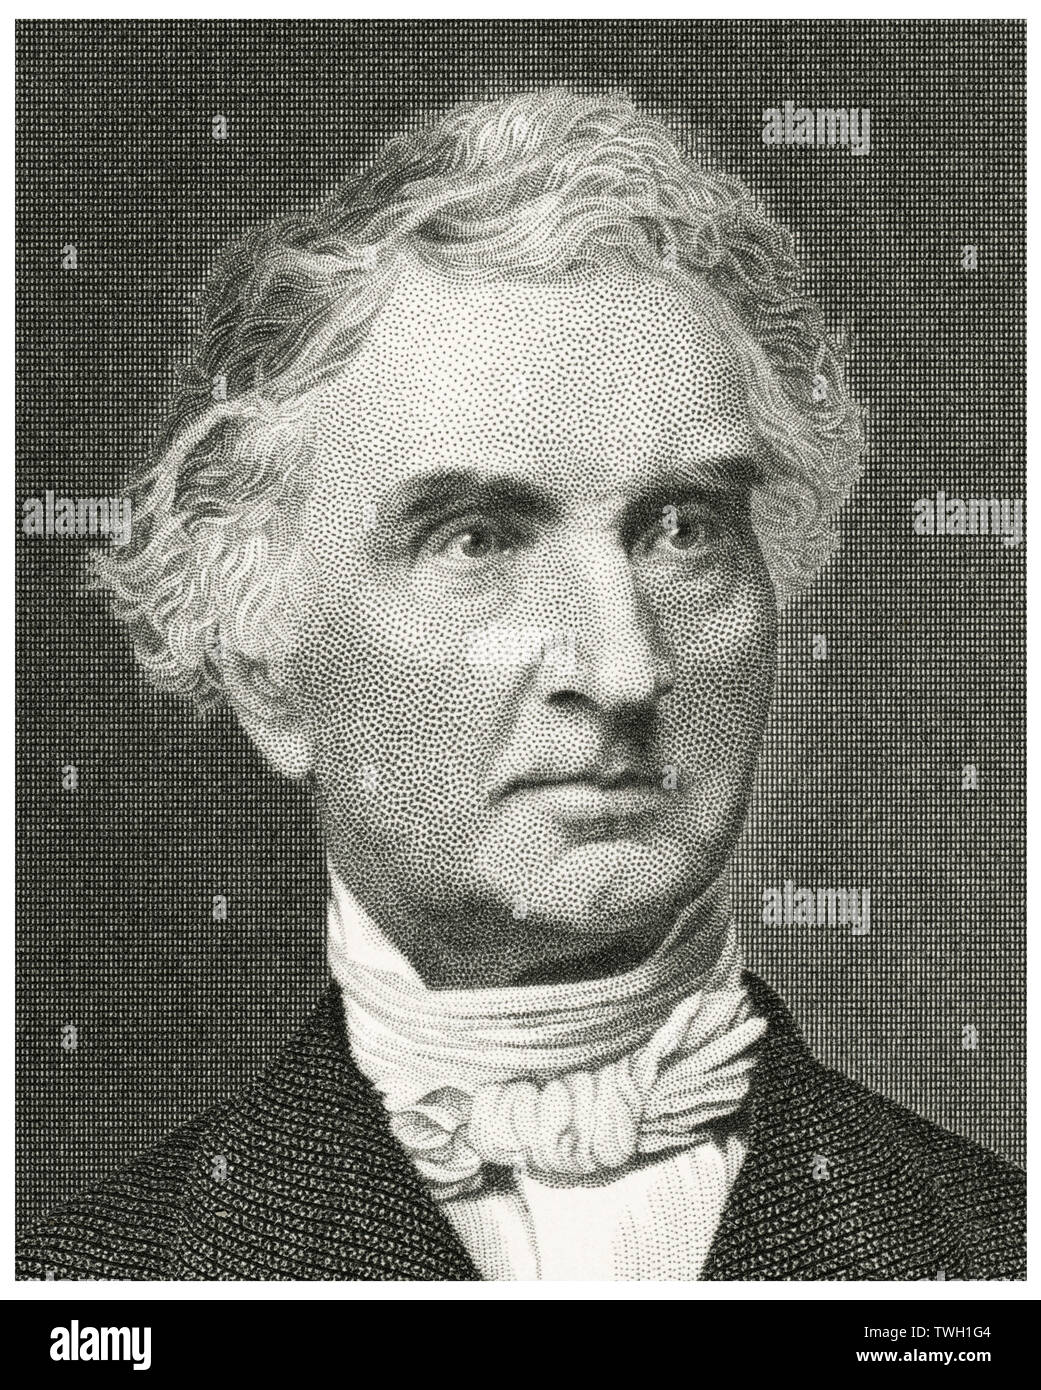 Justus, Baron von Liebig (1803-73), German Chemist, Made Significant Contributions to the Analysis of Organic Compounds, the Organization of Laboratory-based Chemistry Education, and the Application of Chemistry to Biology and Agriculture, head and Shoulders Portrait, Steel Engraving, Portrait Gallery of Eminent Men and Women of Europe and America by Evert A. Duyckinck, Published by Henry J. Johnson, Johnson, Wilson & Company, New York, 1873 Stock Photo